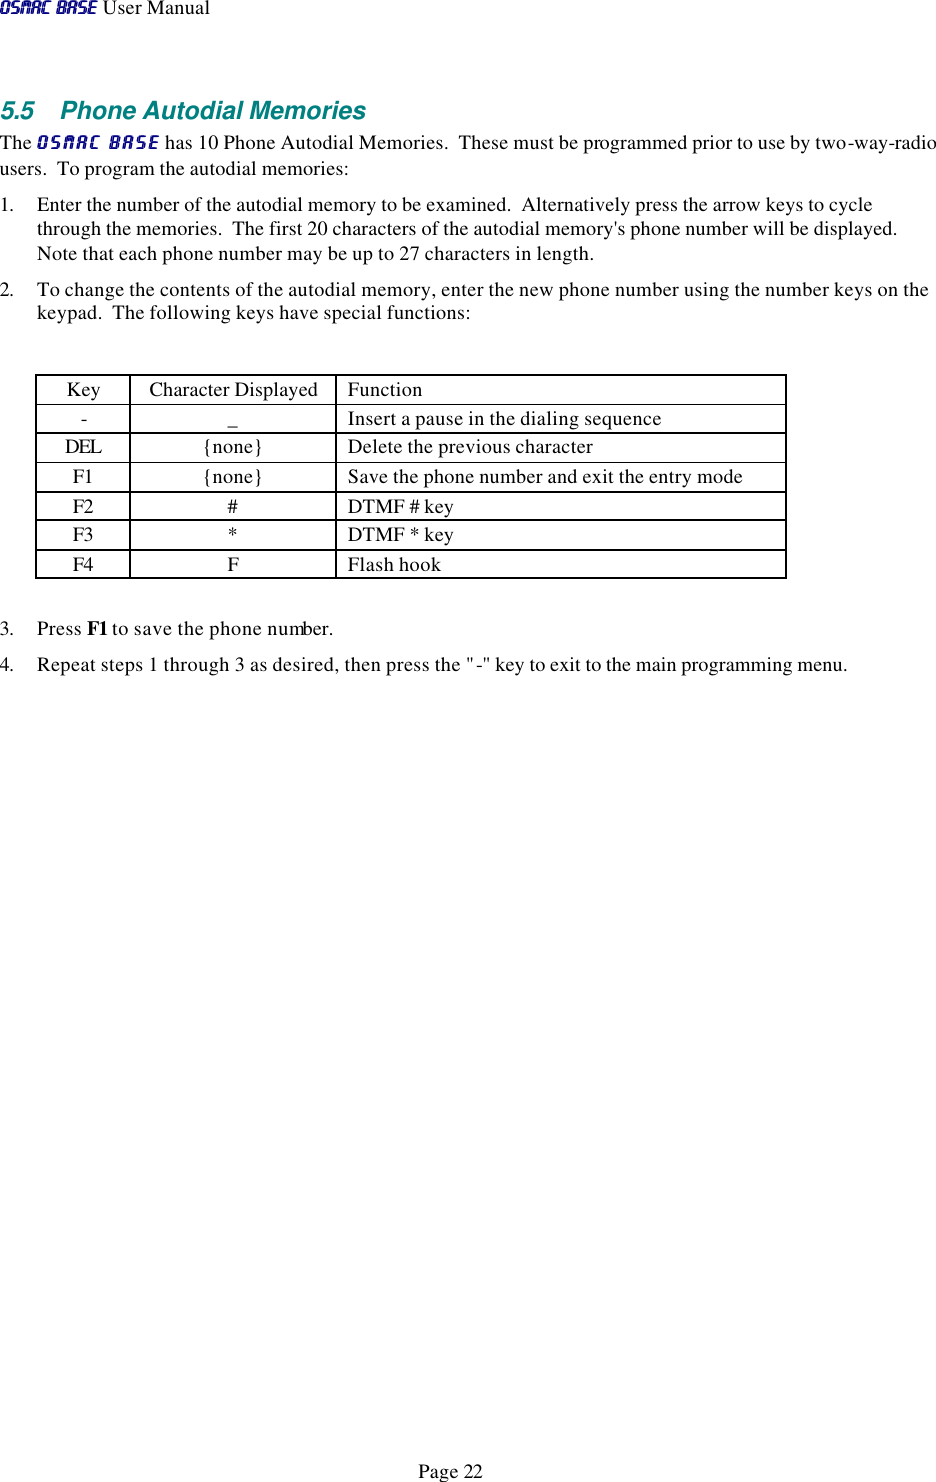 OSMAC BaseOSMAC Base User Manual      Page 22 5.5 Phone Autodial Memories The OSMAC BaseOSMAC Base has 10 Phone Autodial Memories.  These must be programmed prior to use by two-way-radio users.  To program the autodial memories: 1. Enter the number of the autodial memory to be examined.  Alternatively press the arrow keys to cycle through the memories.  The first 20 characters of the autodial memory&apos;s phone number will be displayed.  Note that each phone number may be up to 27 characters in length. 2. To change the contents of the autodial memory, enter the new phone number using the number keys on the keypad.  The following keys have special functions:  Key Character Displayed Function - _ Insert a pause in the dialing sequence DEL {none} Delete the previous character F1 {none} Save the phone number and exit the entry mode F2 # DTMF # key F3 * DTMF * key F4 F Flash hook  3. Press F1 to save the phone number.   4. Repeat steps 1 through 3 as desired, then press the &quot;-&quot; key to exit to the main programming menu. 